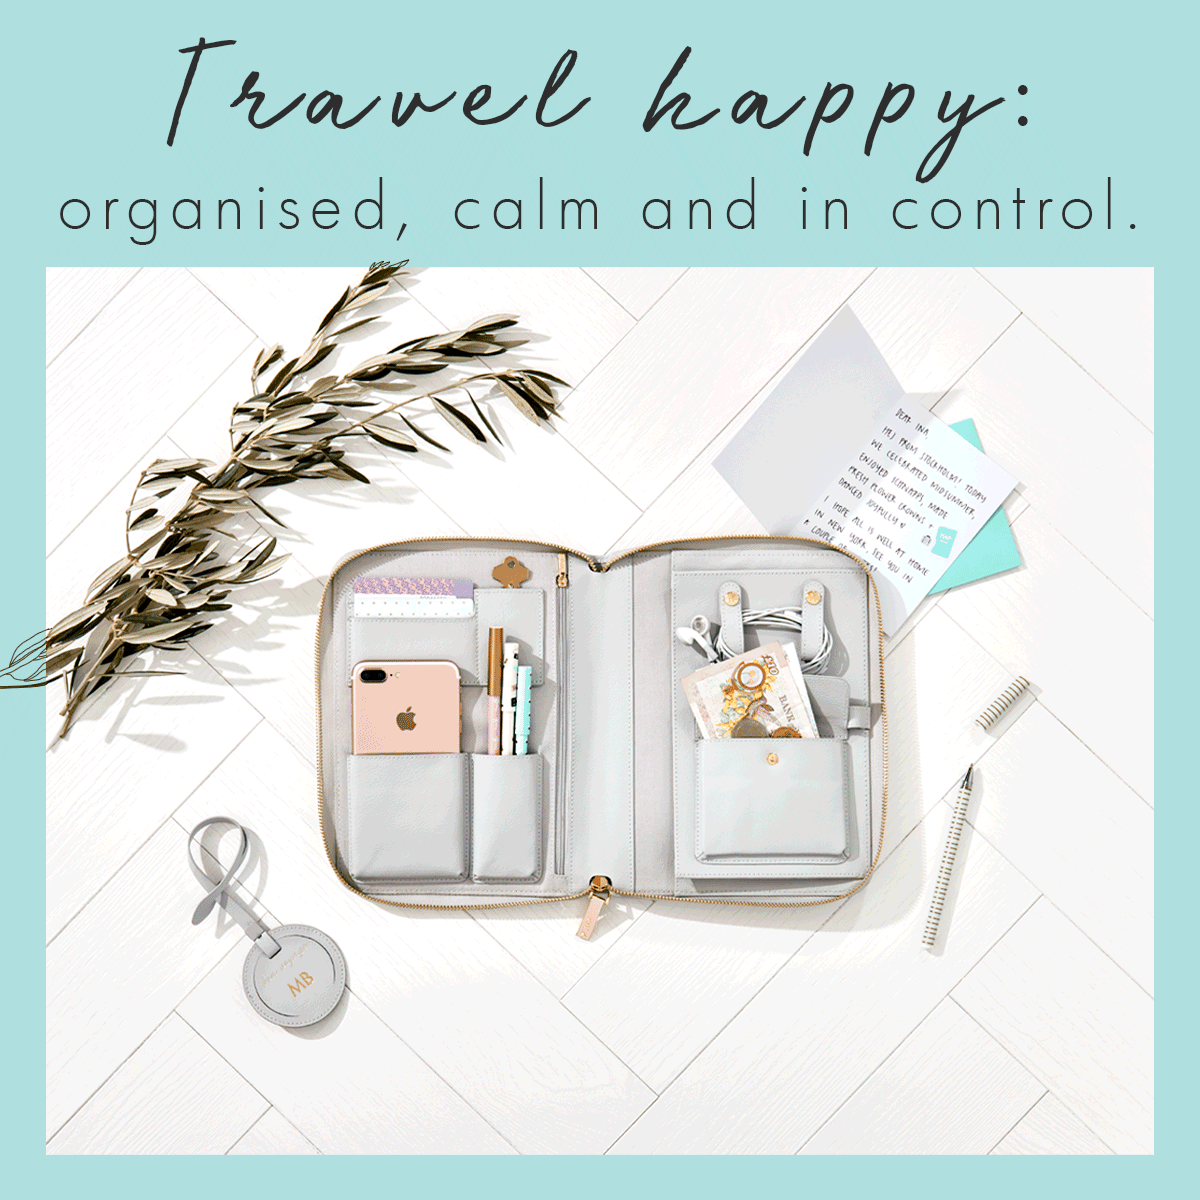 Travel happy: organised, calm and in control. 